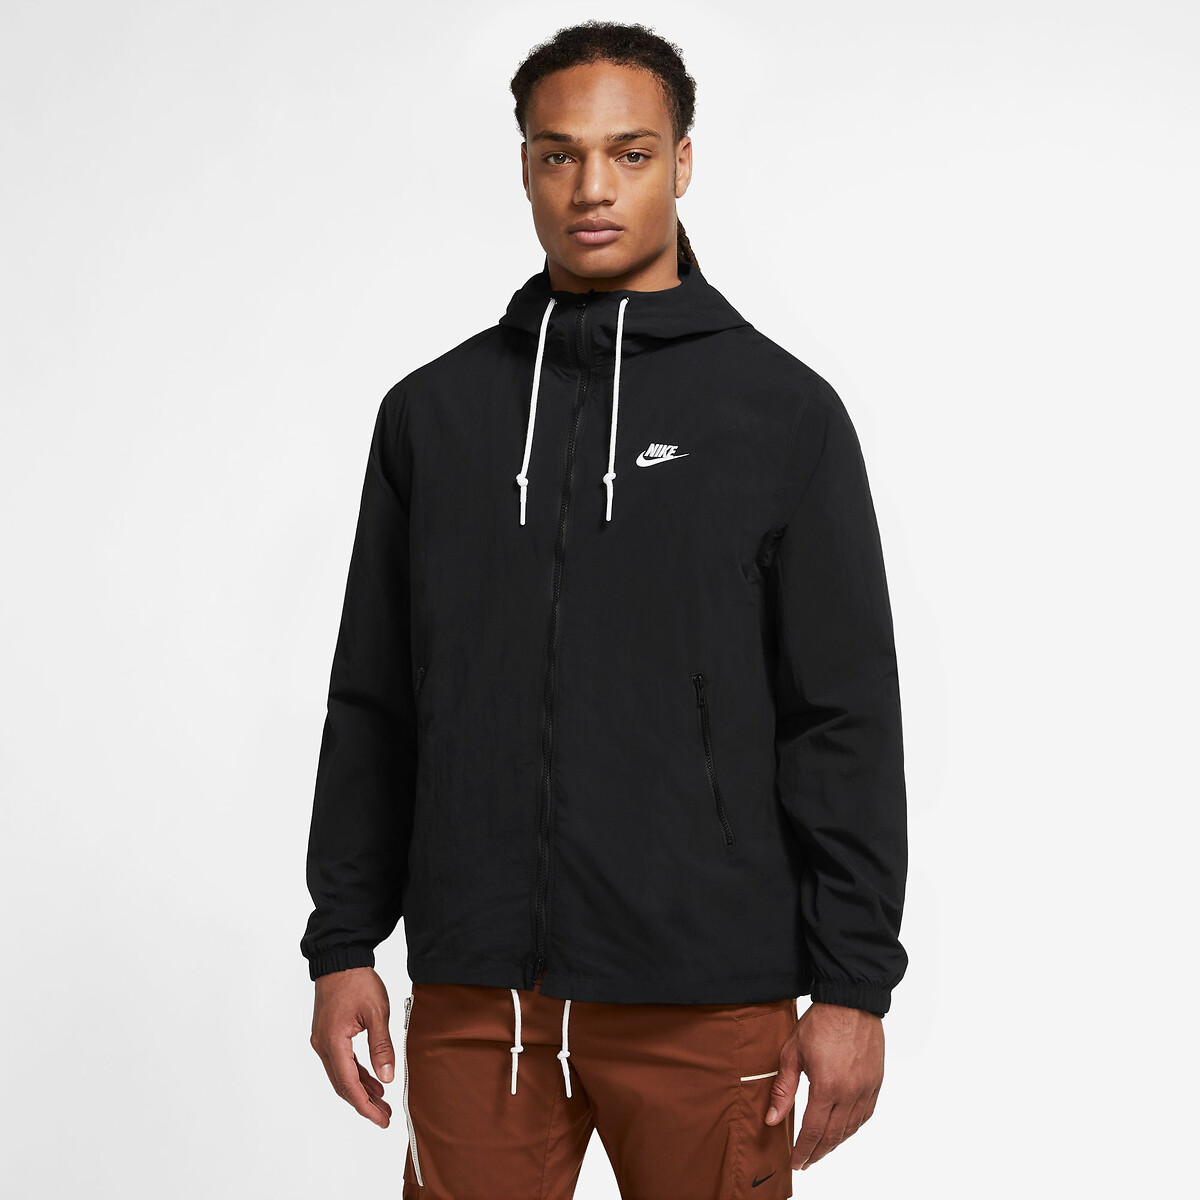 Fb7397 embroidered logo jacket with hood and zip fastening, black, Nike ...